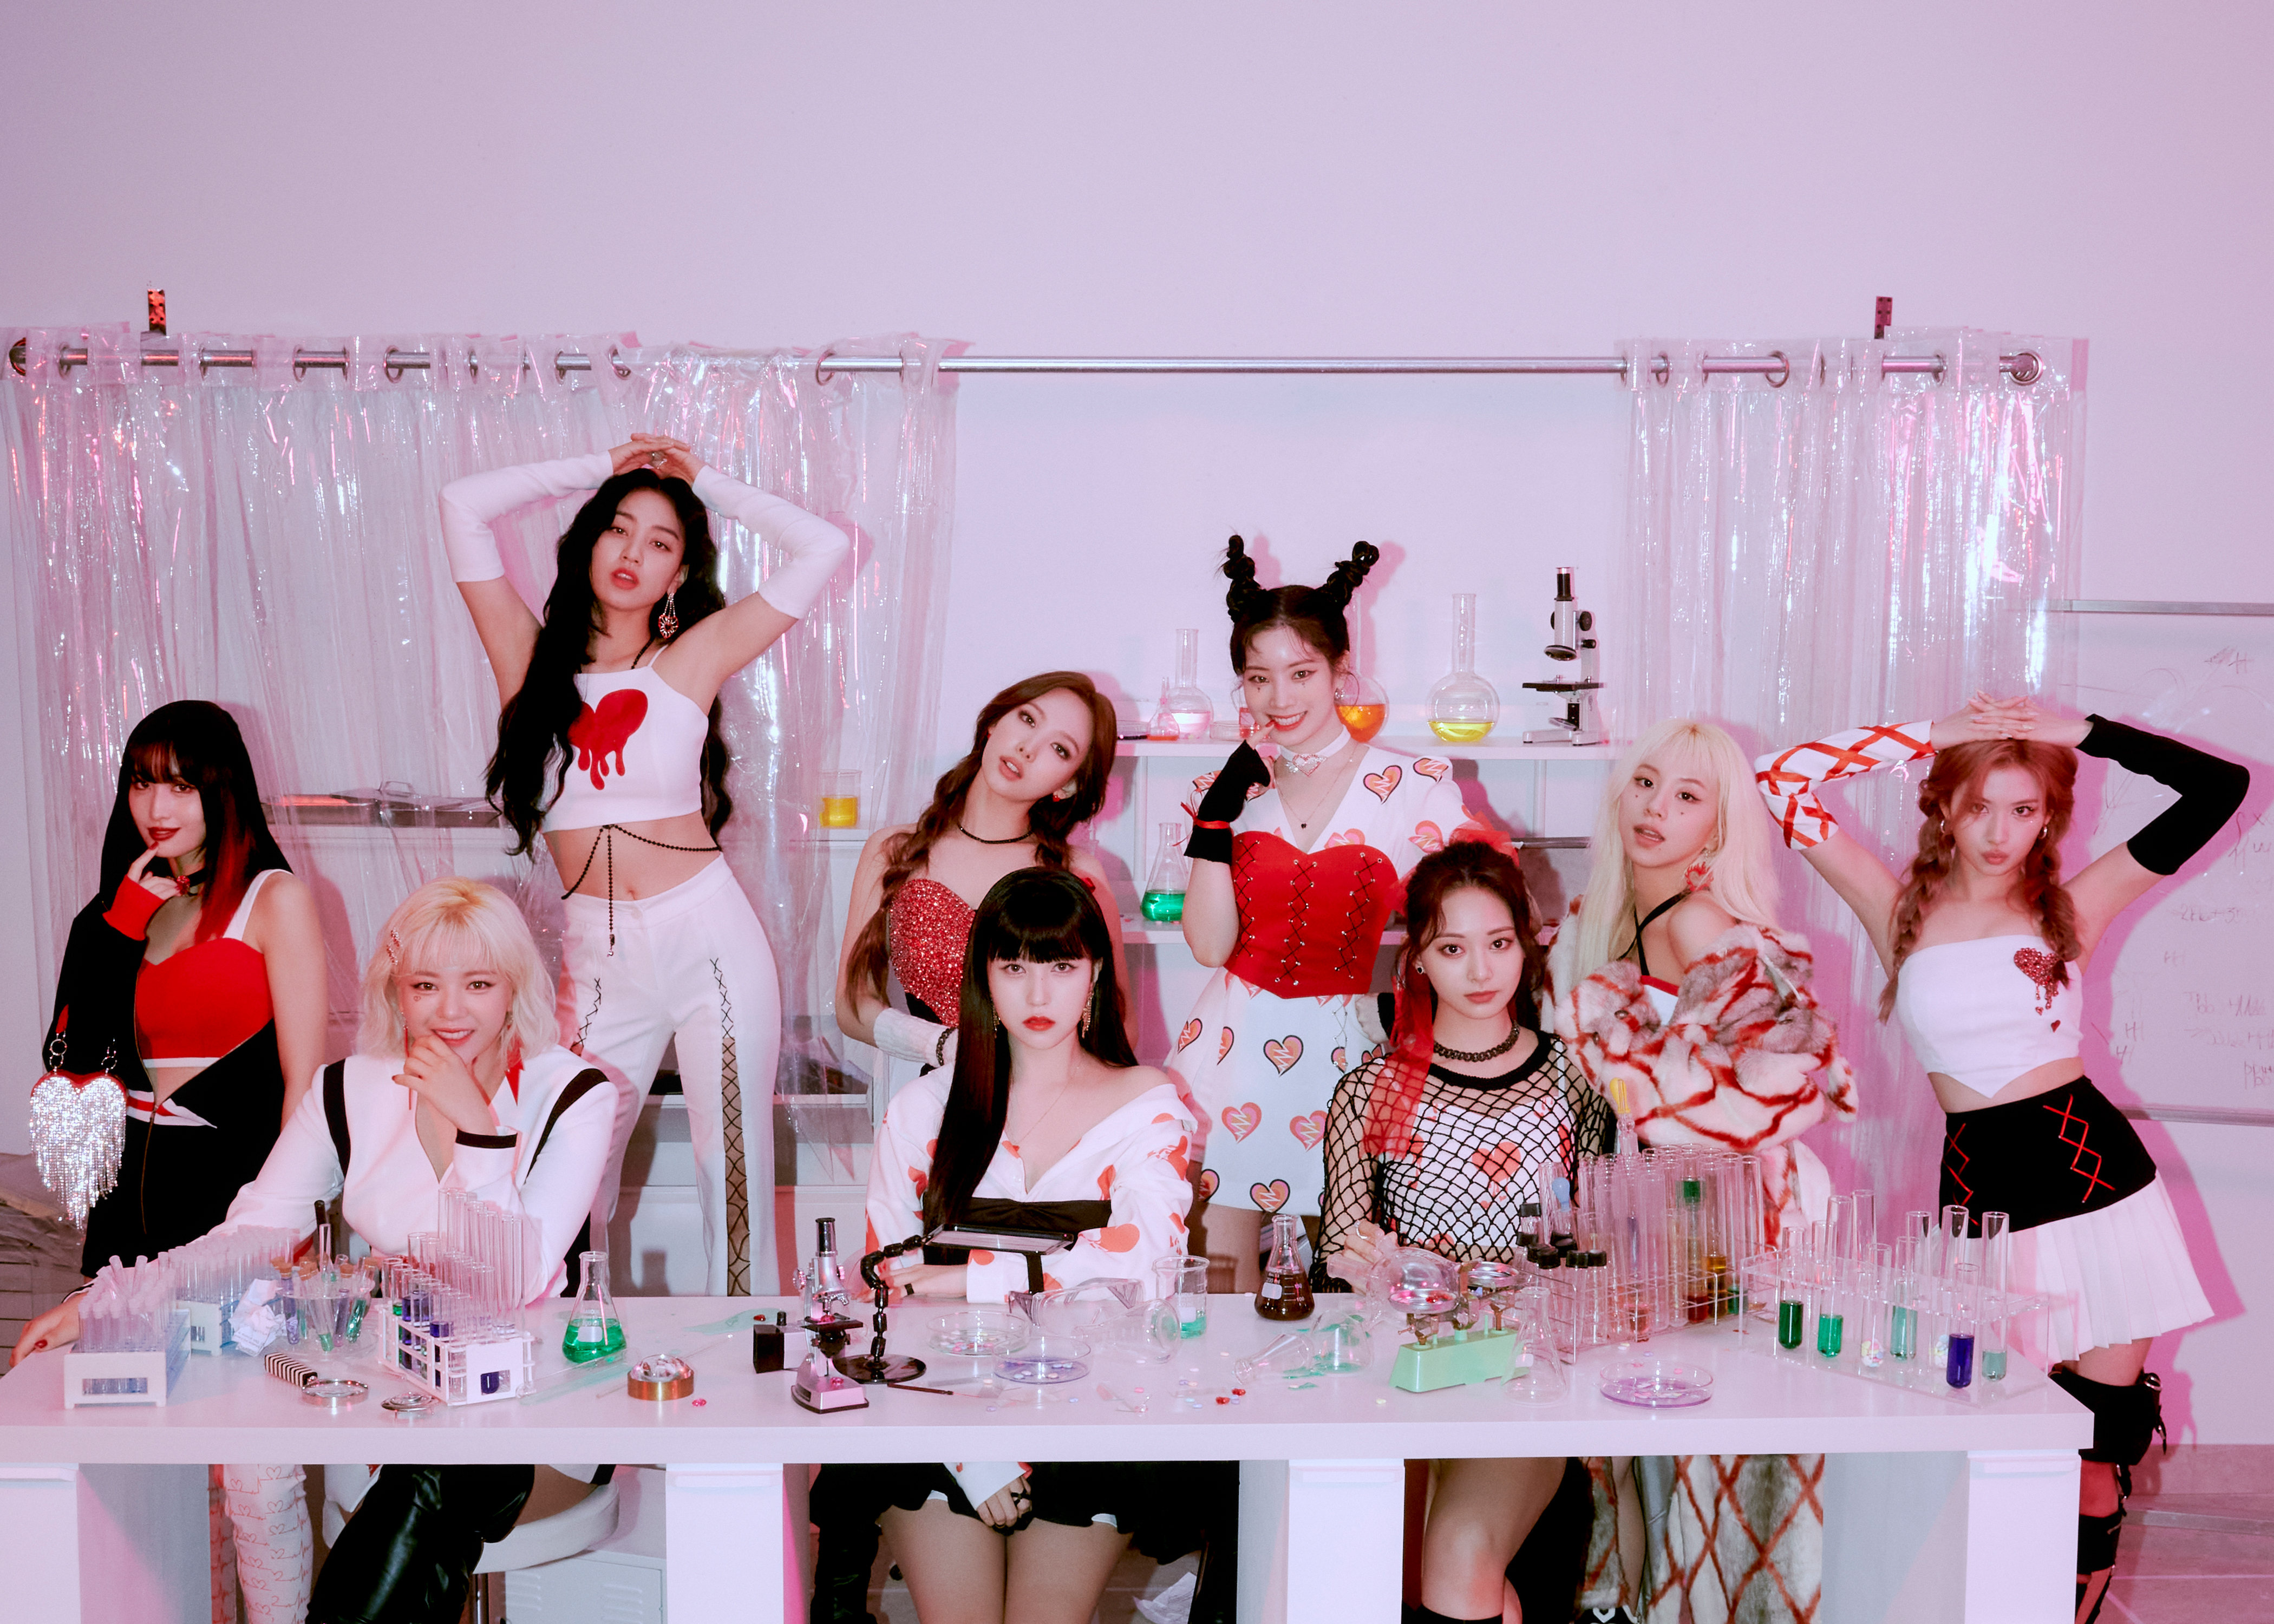 TWICE Formula of Love Concept Group